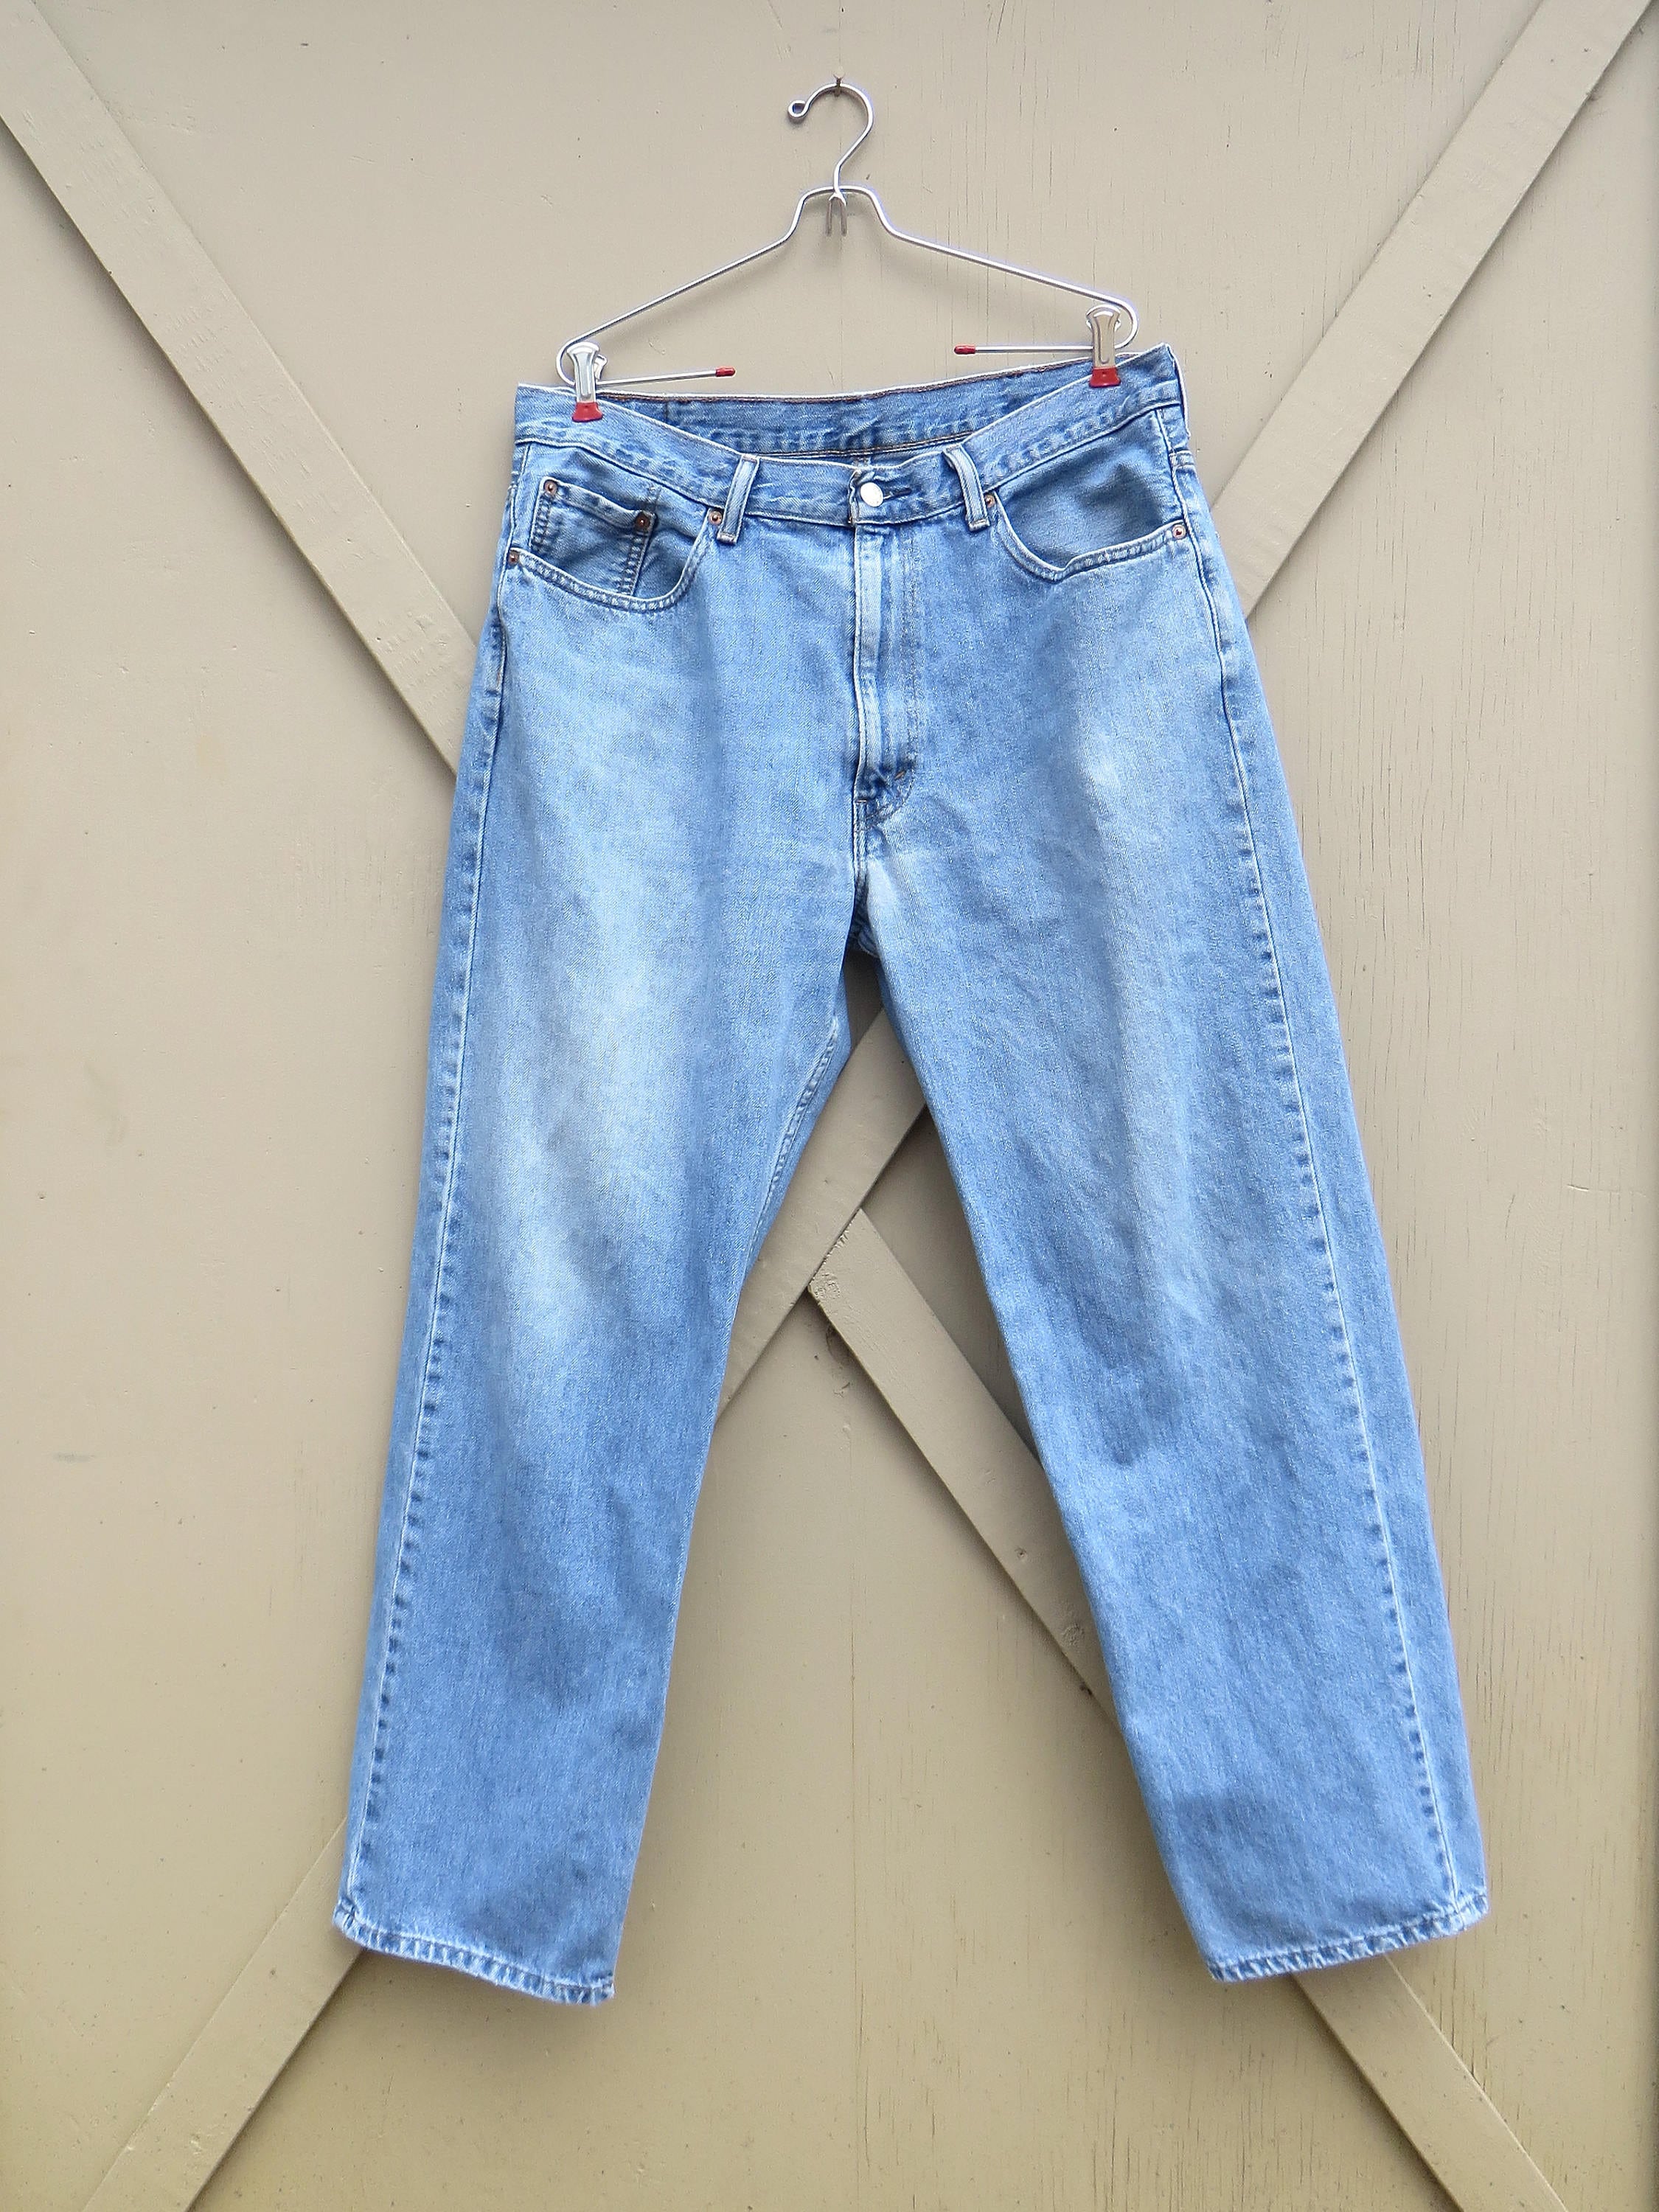 Vintage Levi's 550 Relaxed Fit Medium Wash Distressed - Etsy